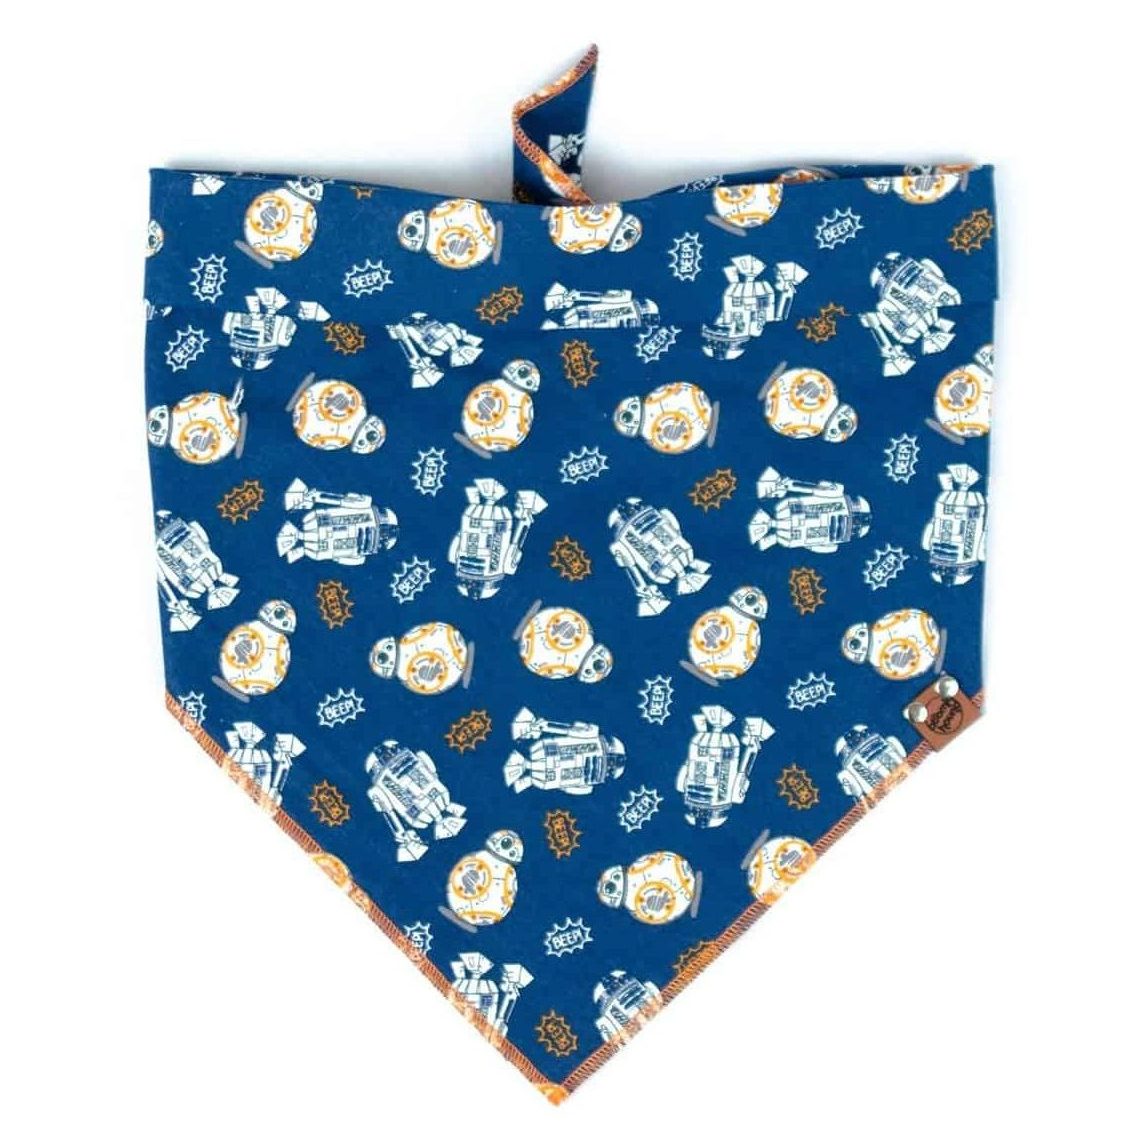 Blue Star Wars Dog Bandana with R2D2 and BB8